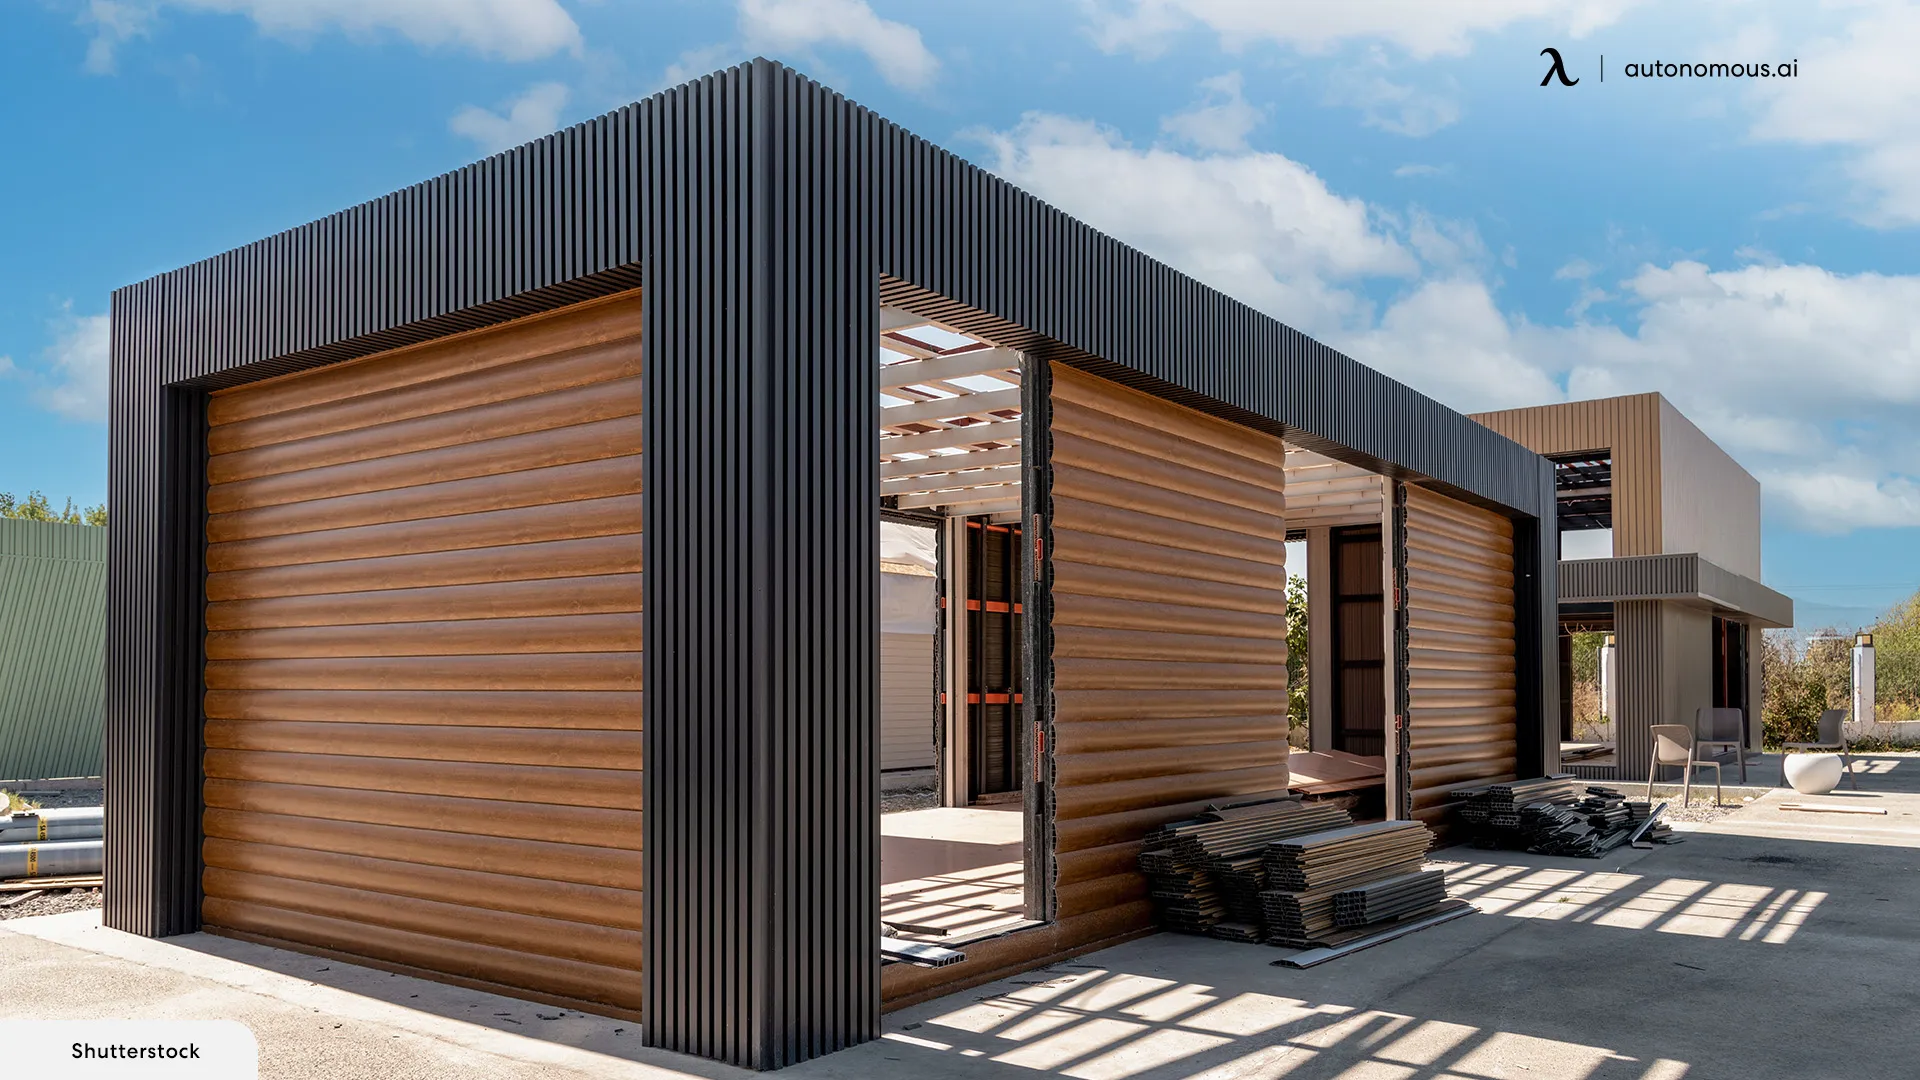 Comparing Panelized Homes vs. Modular Prefabricated Homes